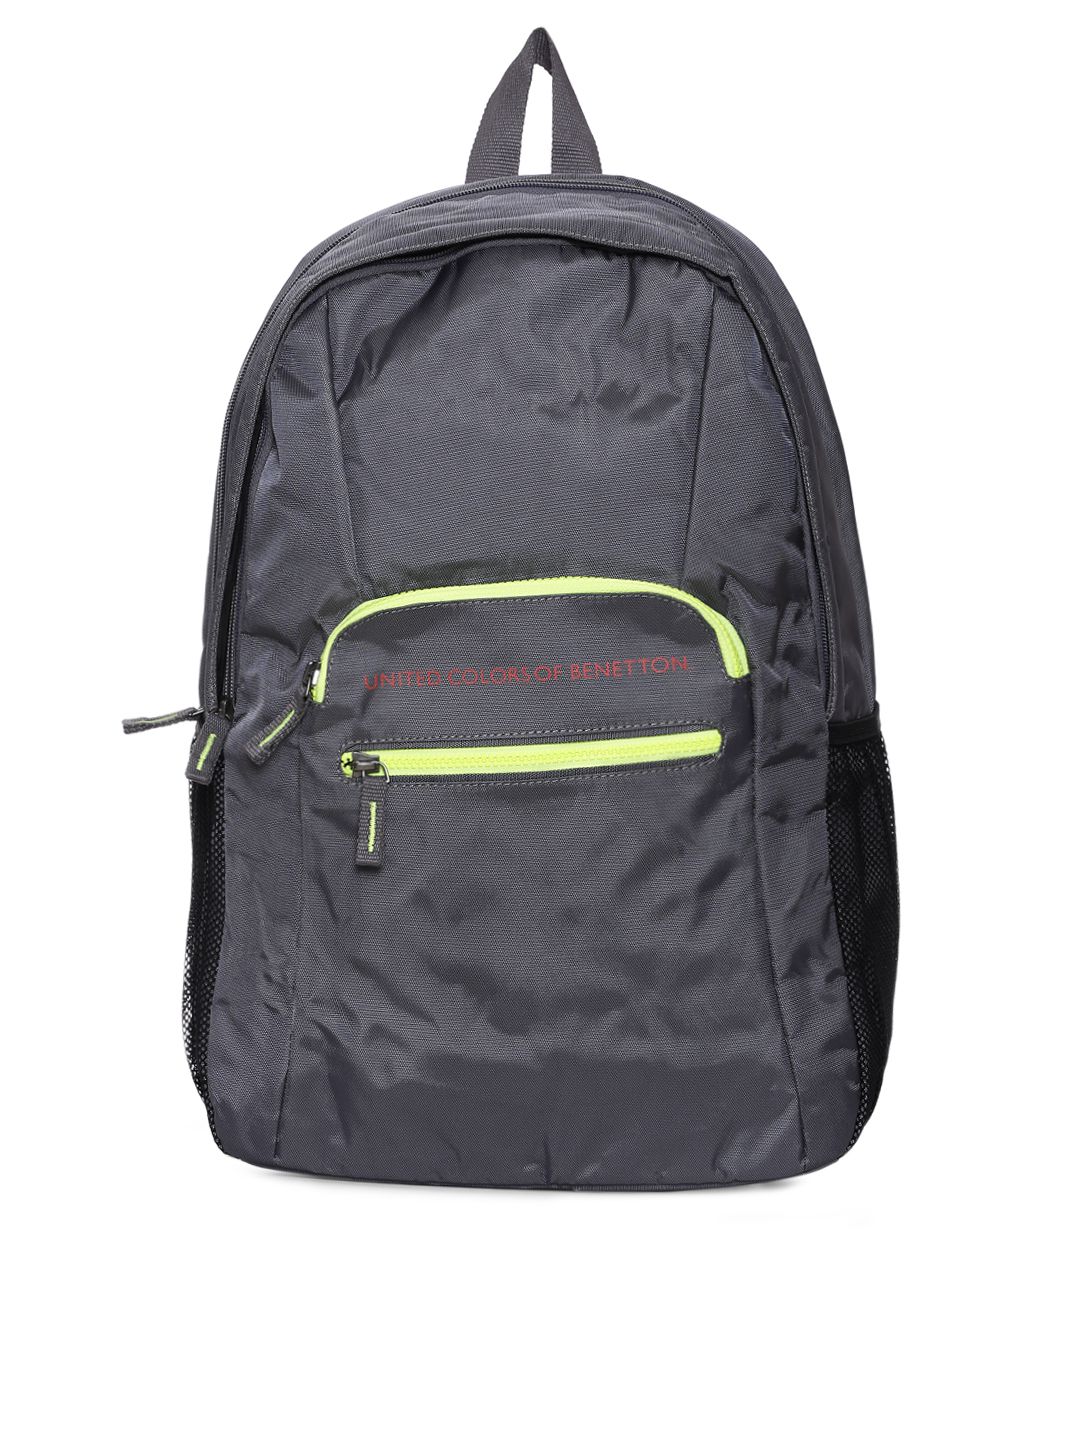 United Colors of Benetton Grey Backpack - Buy United Colors of Benetton ...